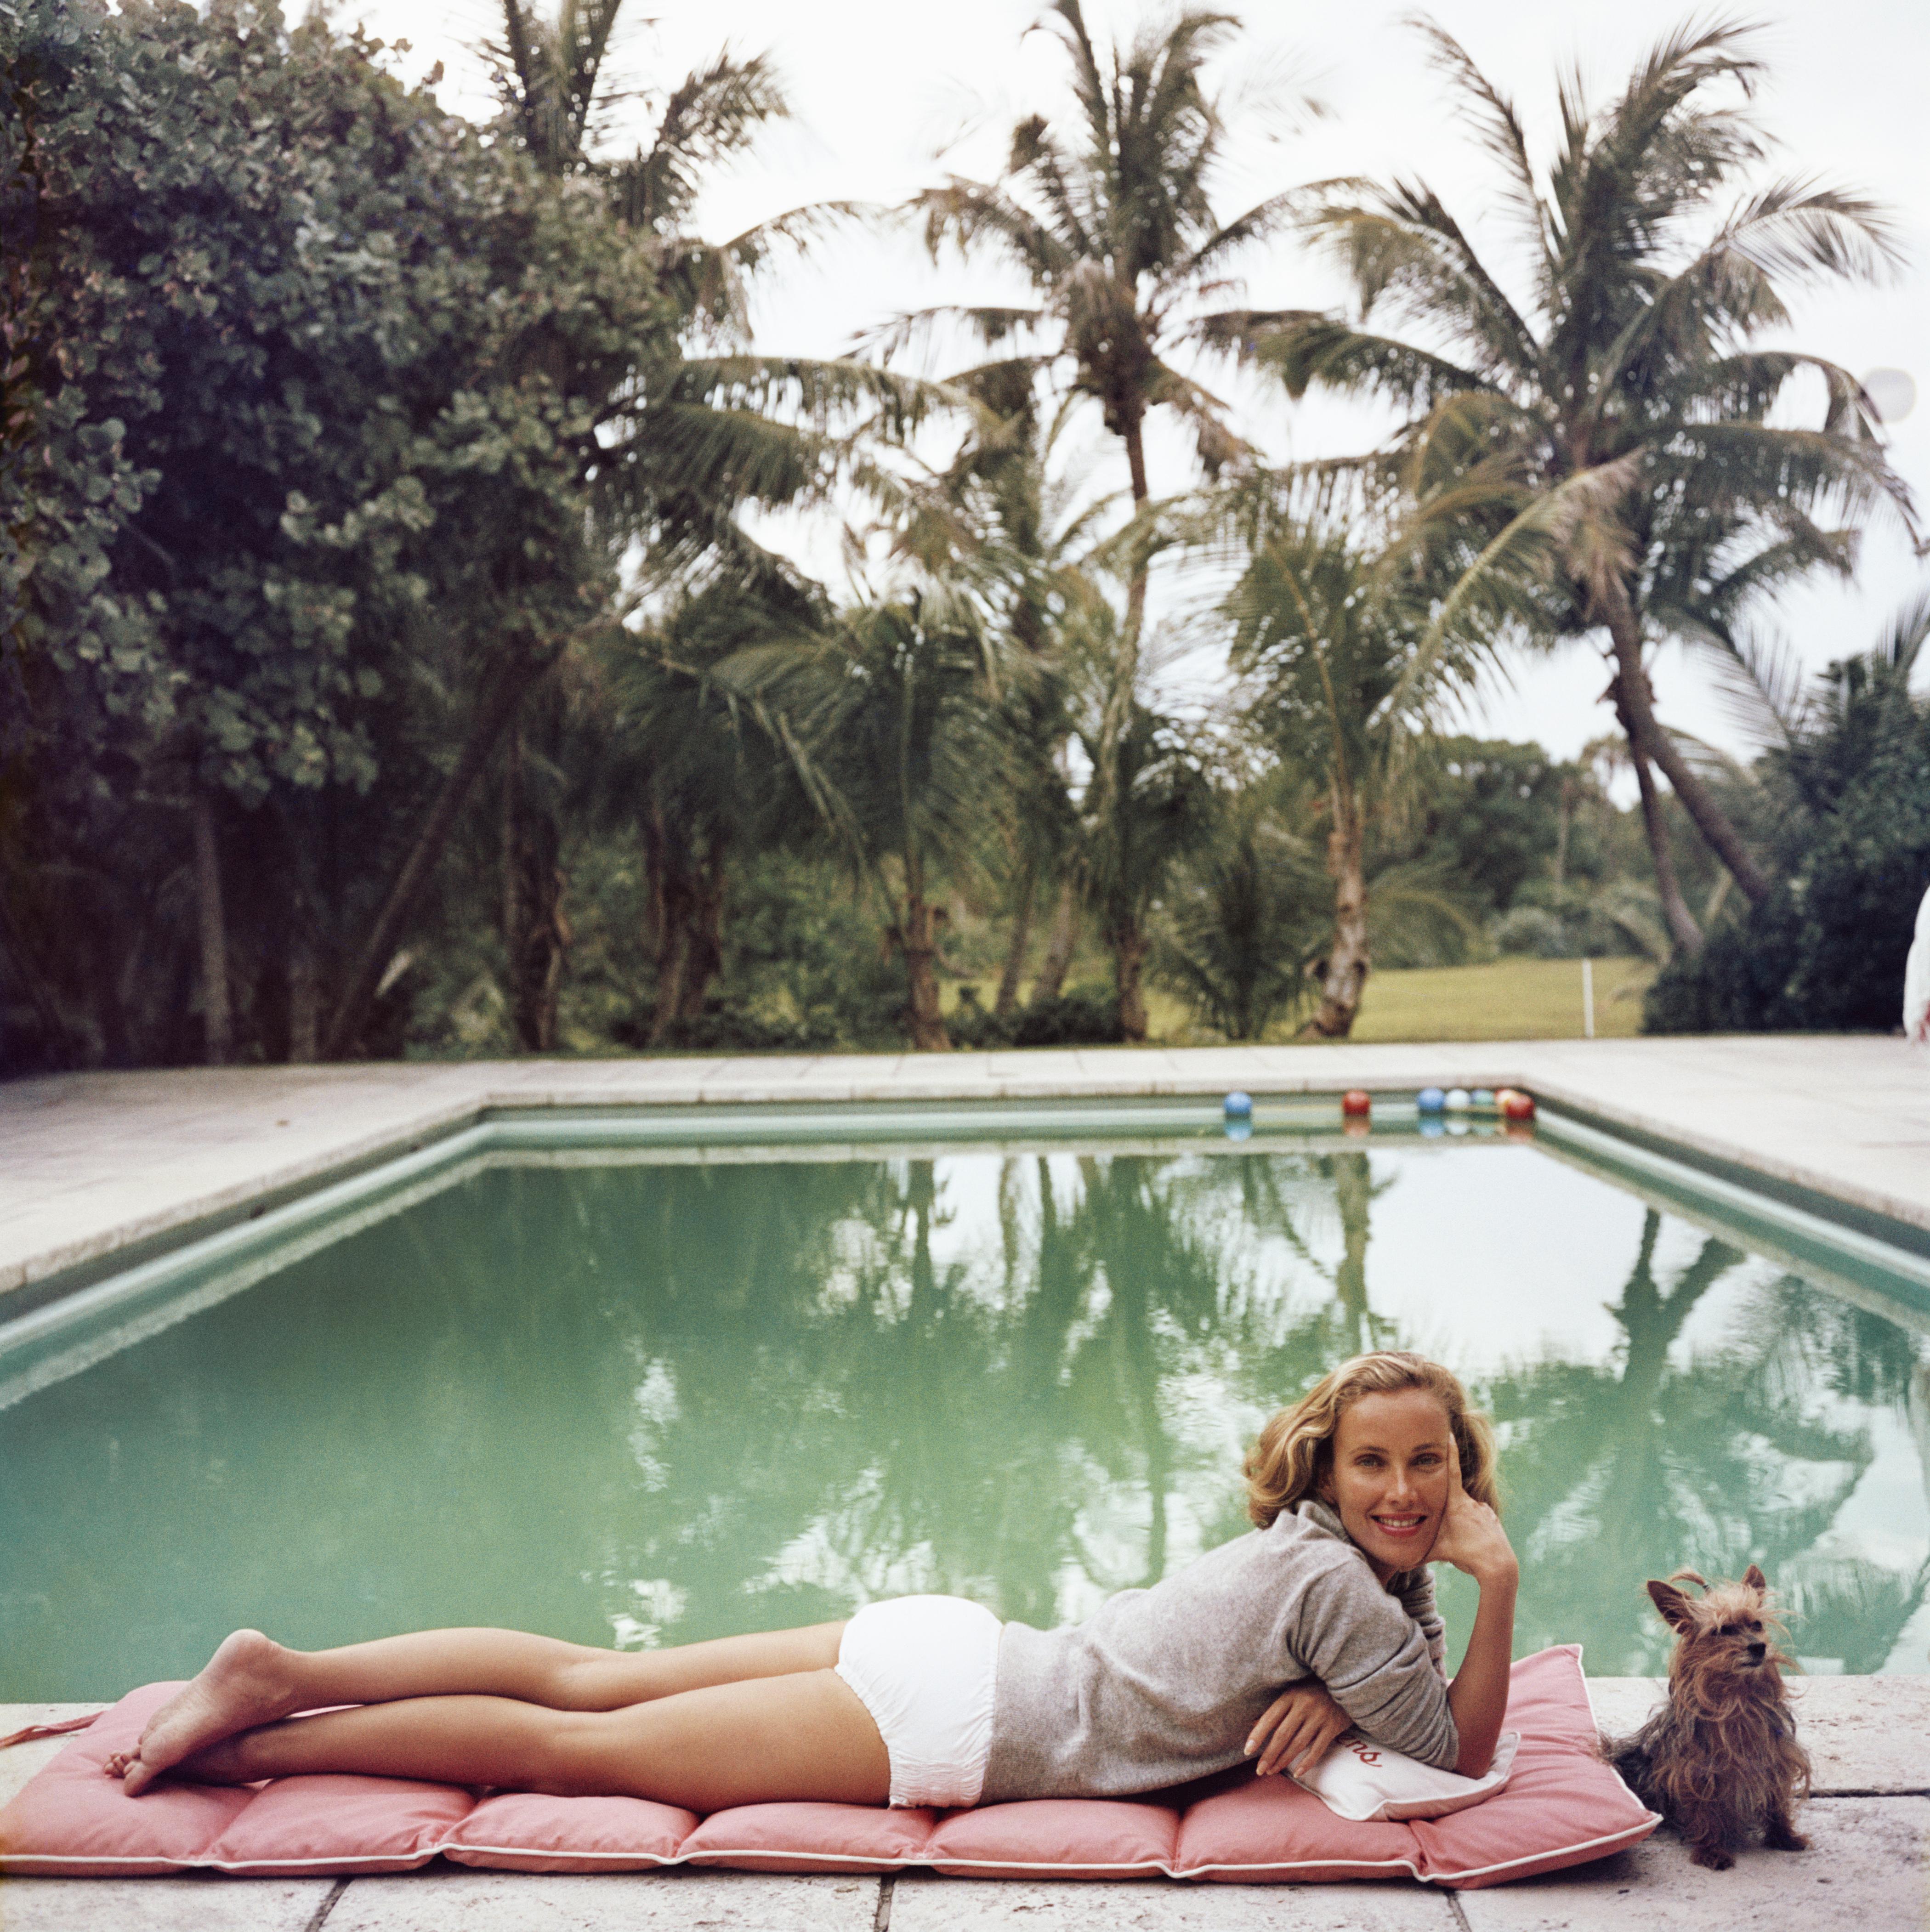 Slim Aarons Landscape Photograph - Having a Topping Time, Estate Edition (Vintage Poolside, Midcentury Socialite)